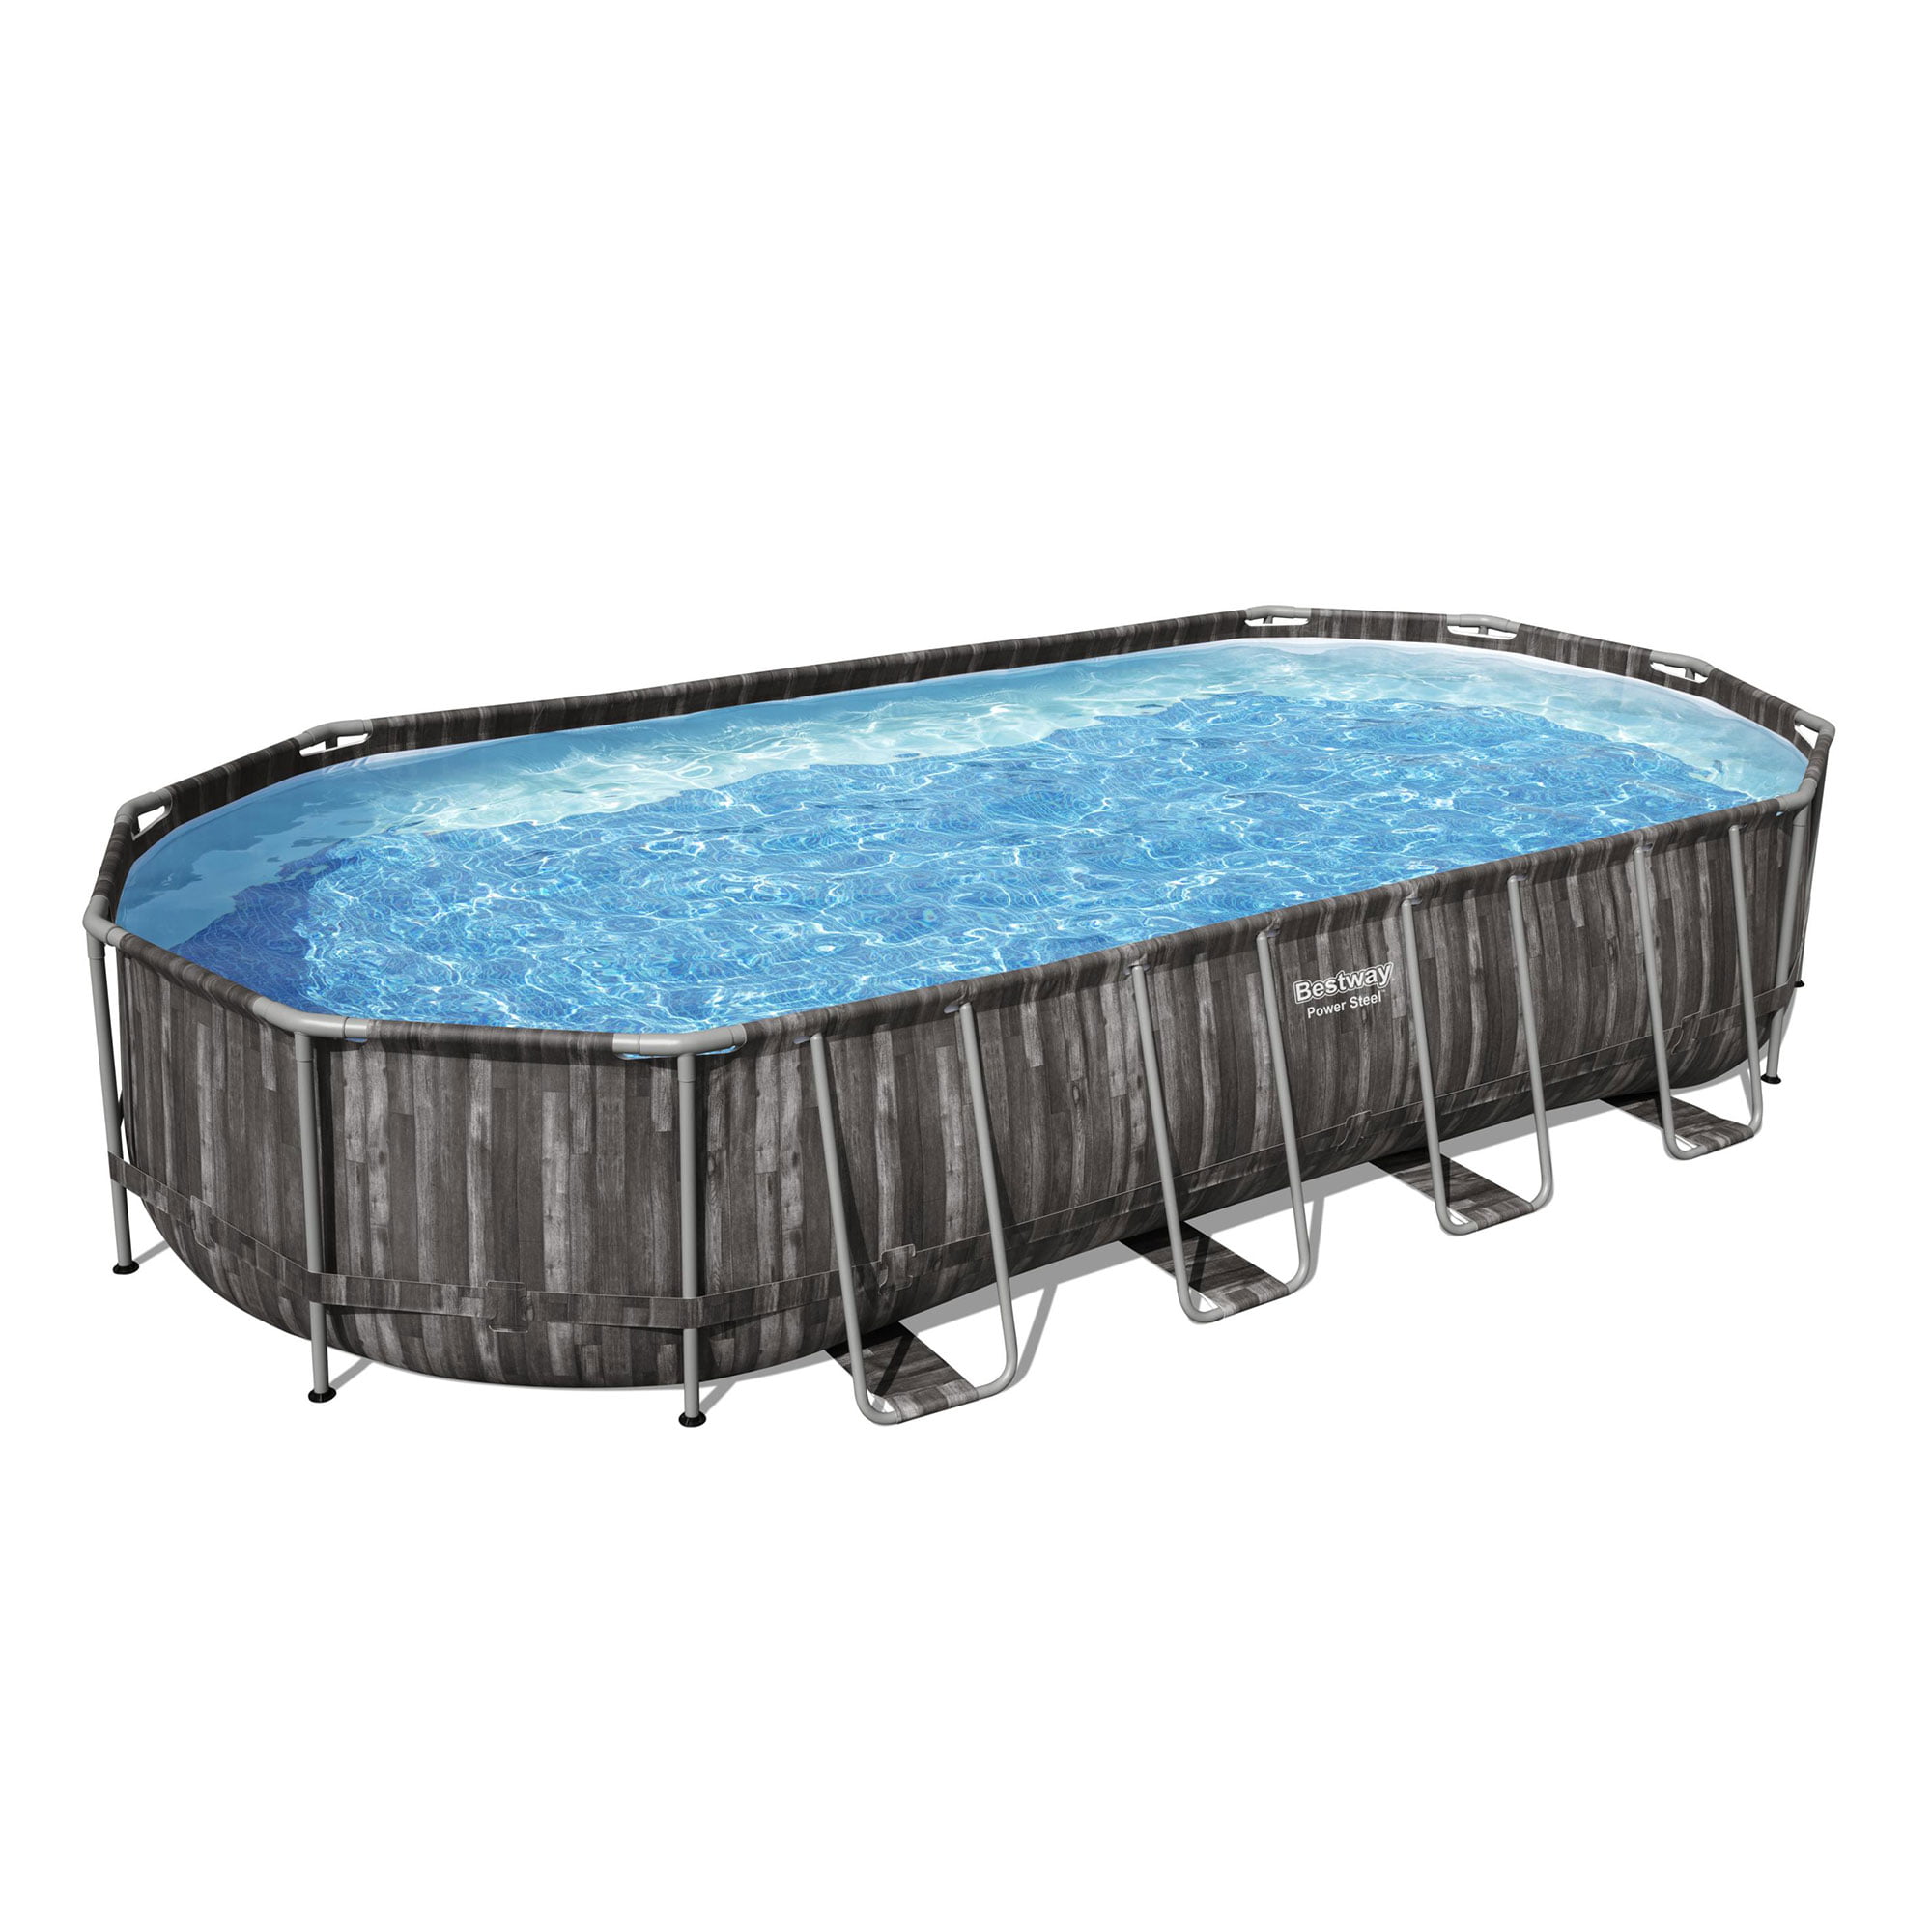 Simple Above Ground Swimming Pool 12 X 48 for Large Space